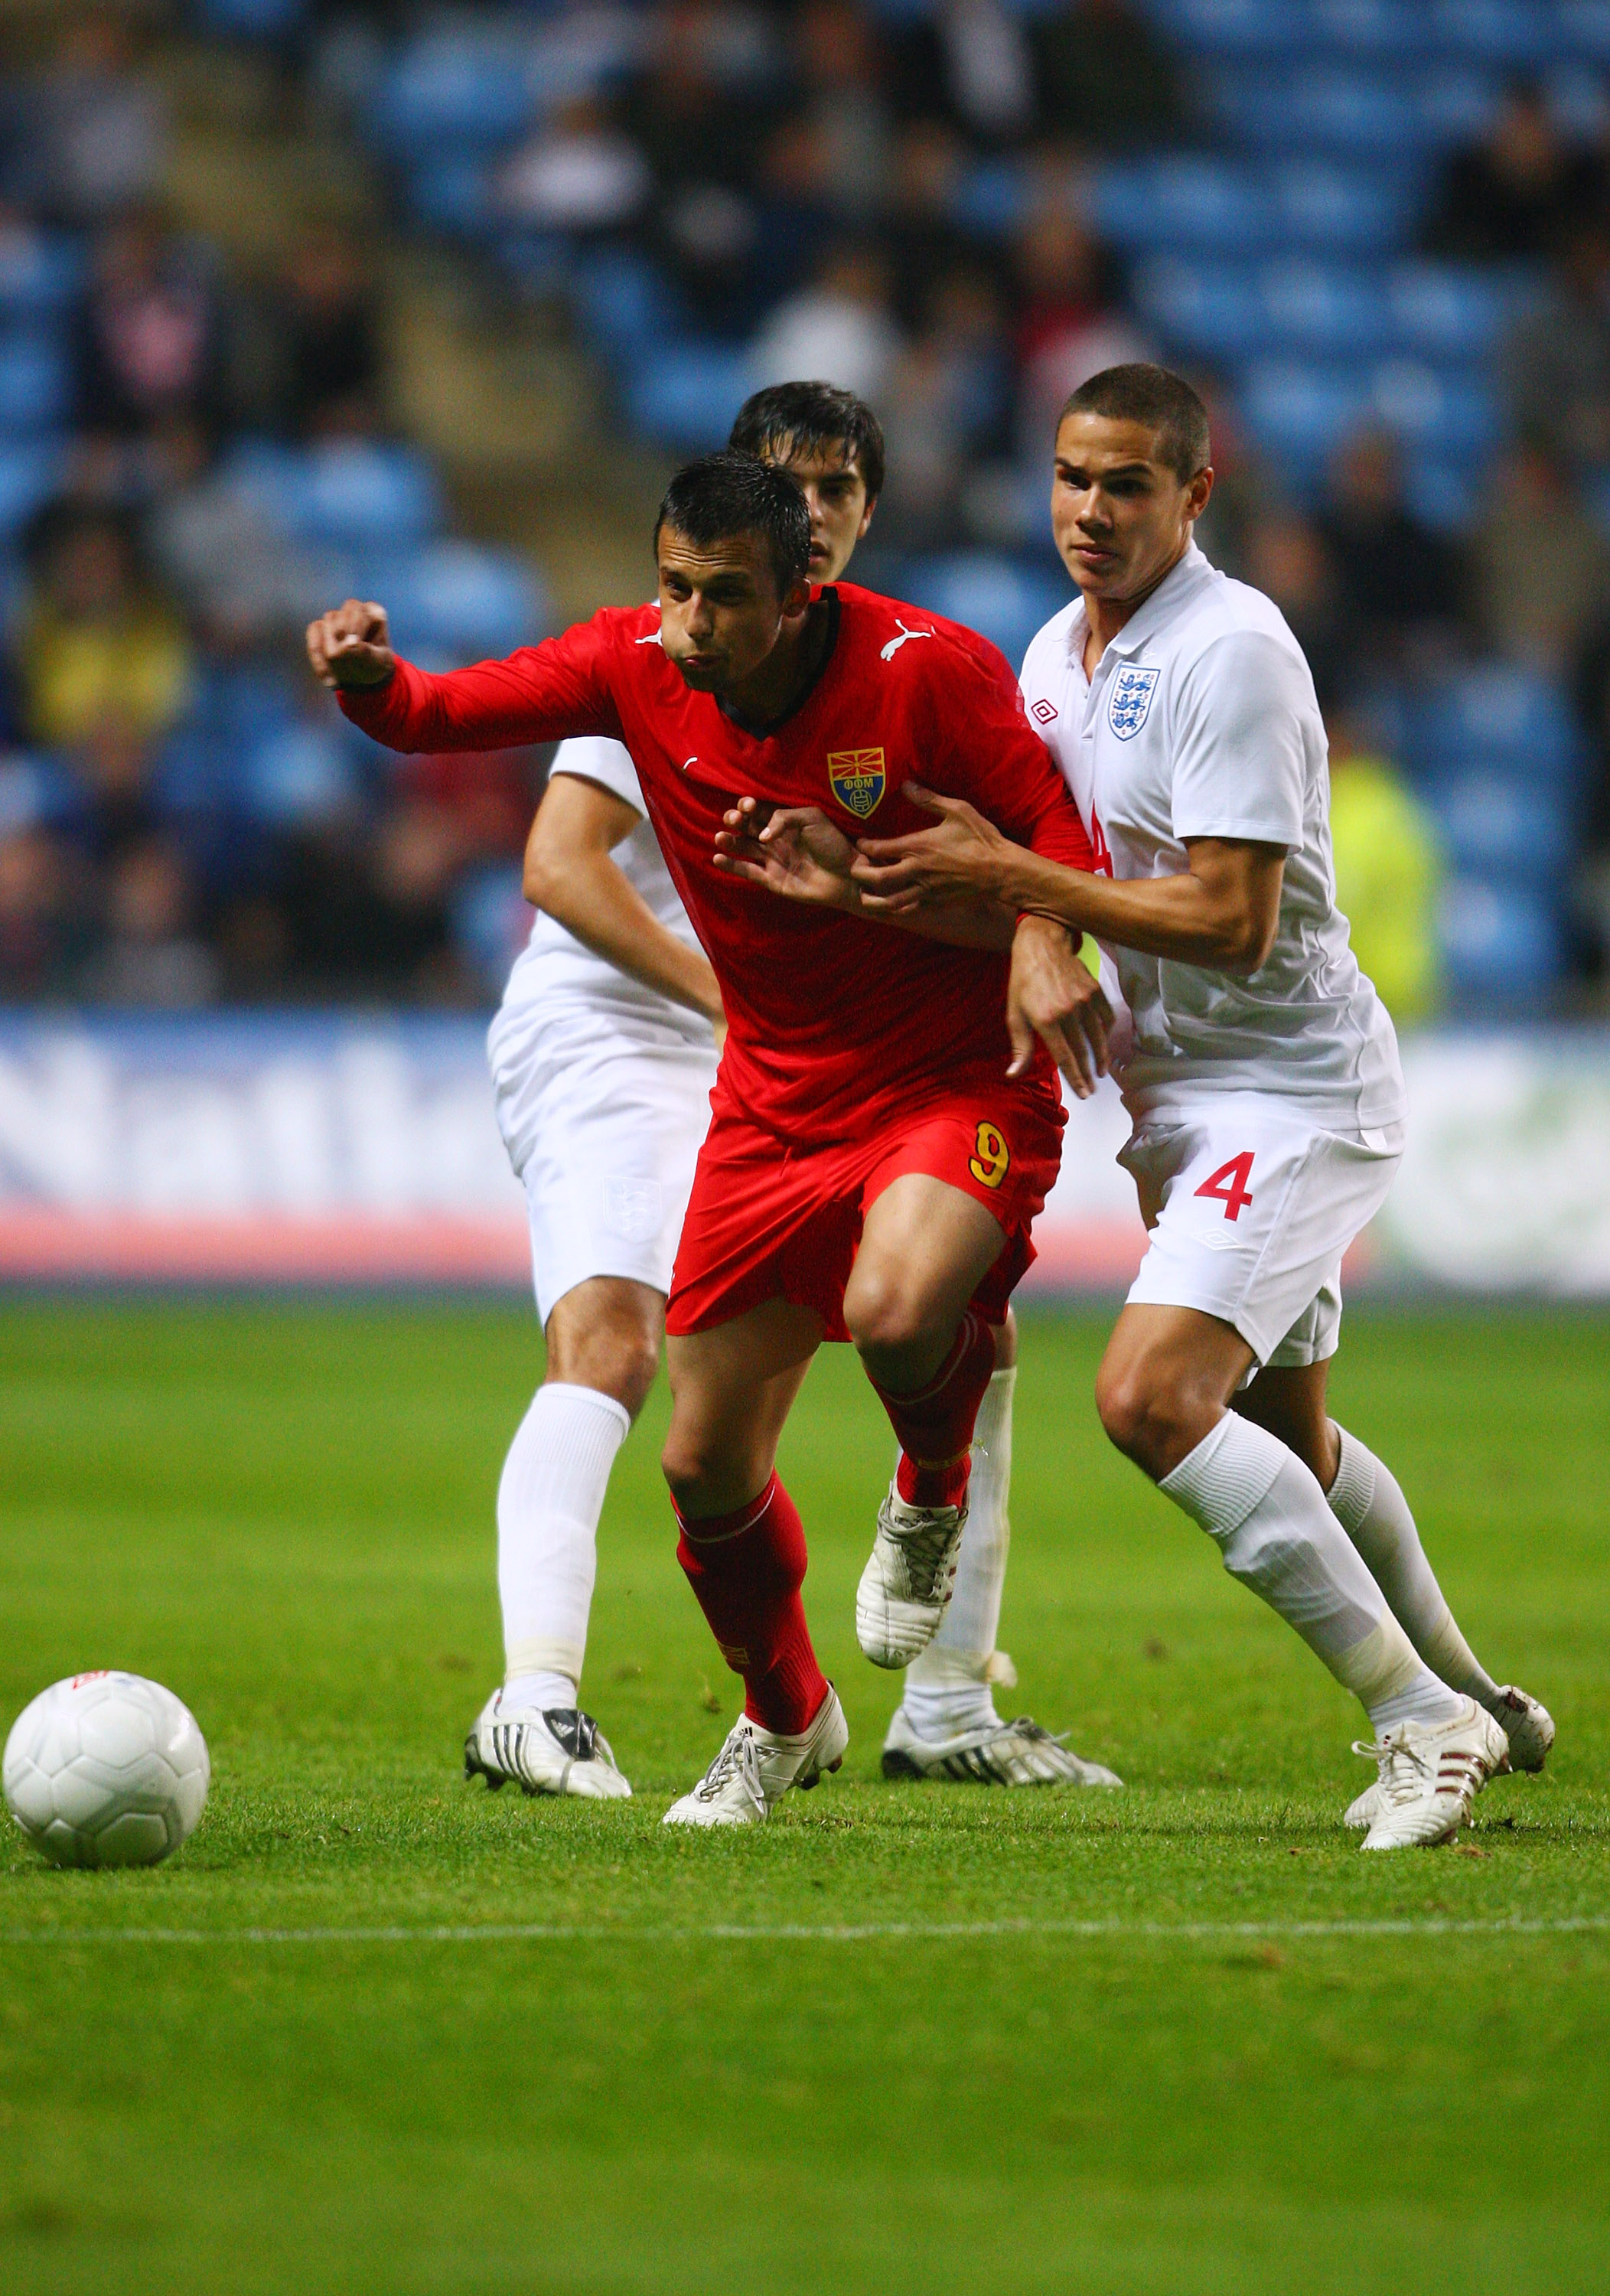 COVENTRY, ENGLAND - OCTOBER 09:  Jack Rodwell (R) of England battles with Mirko Ivanovski of Macedonia during the UEFA U21 Championship qualifier between England and Macedonia at the Ricoh Arena on October 9, 2009 in Coventry, England.  (Photo by Jamie Mc